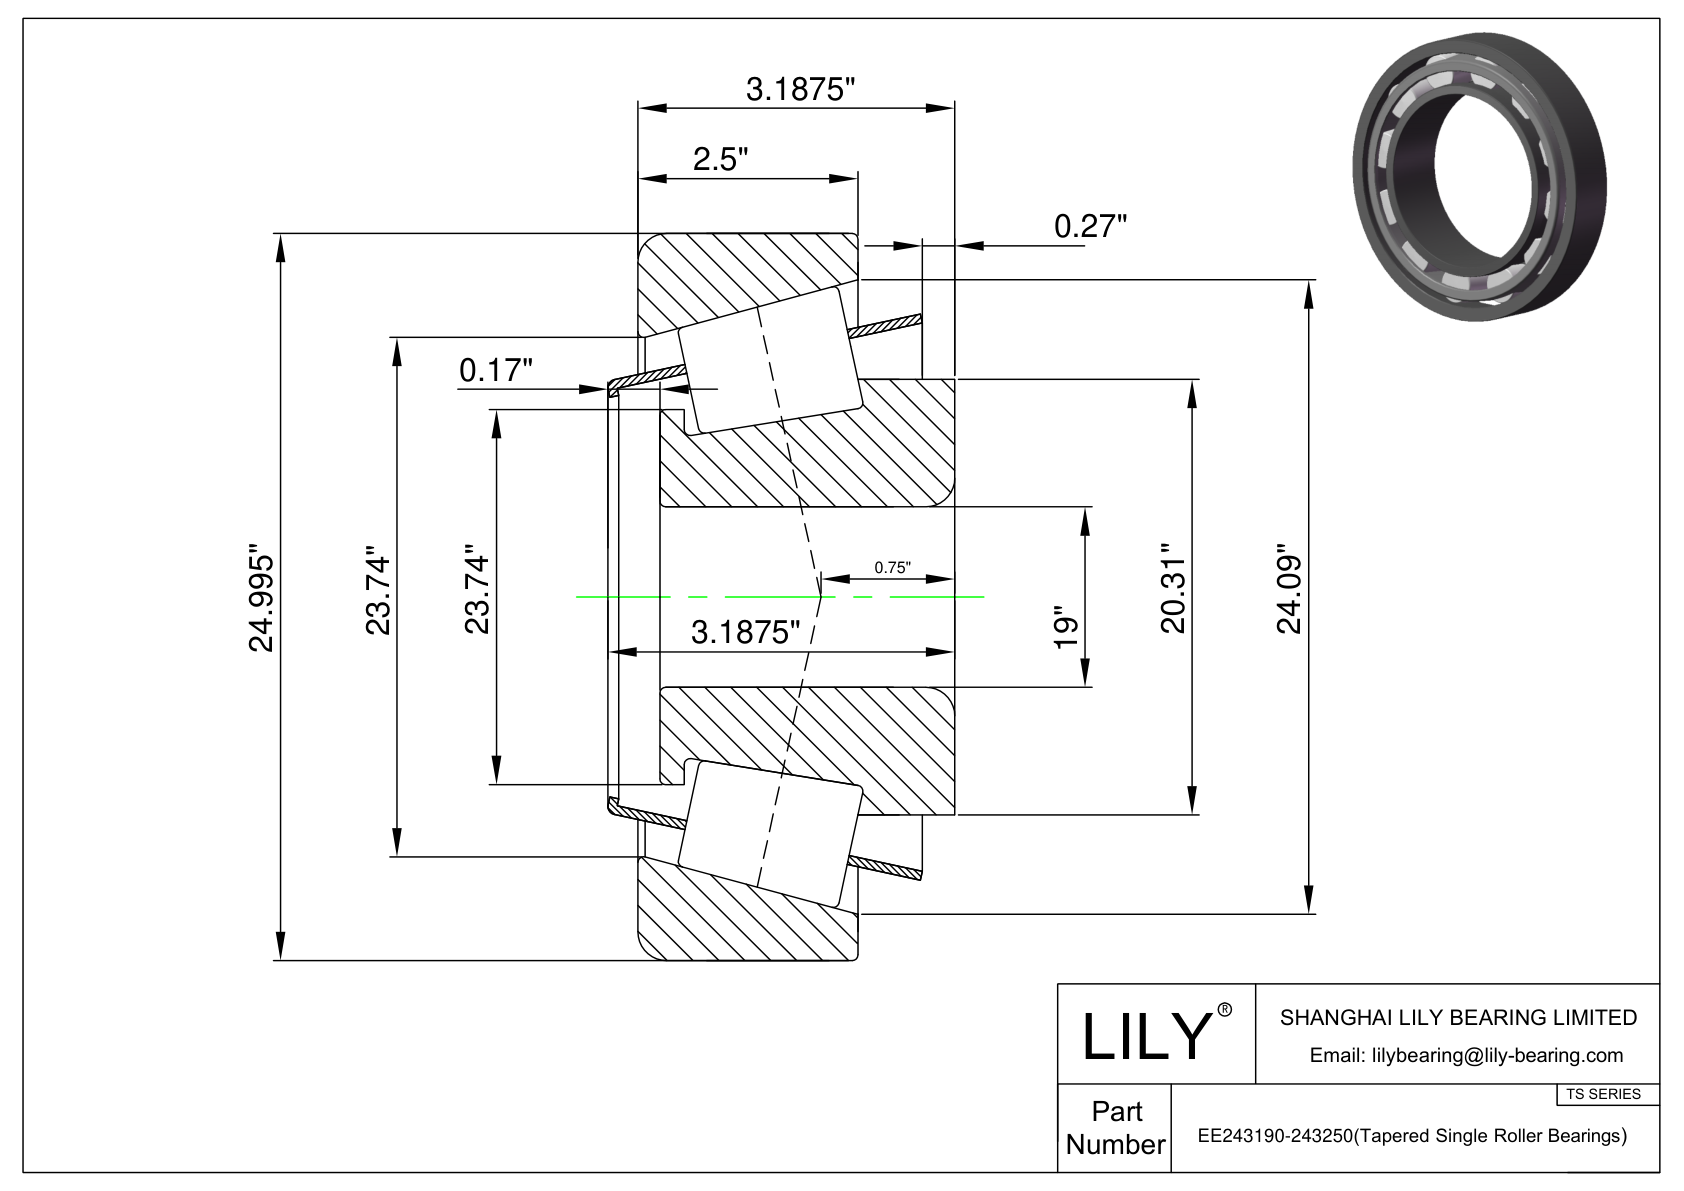 EE243190-243250 TS (Tapered Single Roller Bearings) (Imperial) cad drawing